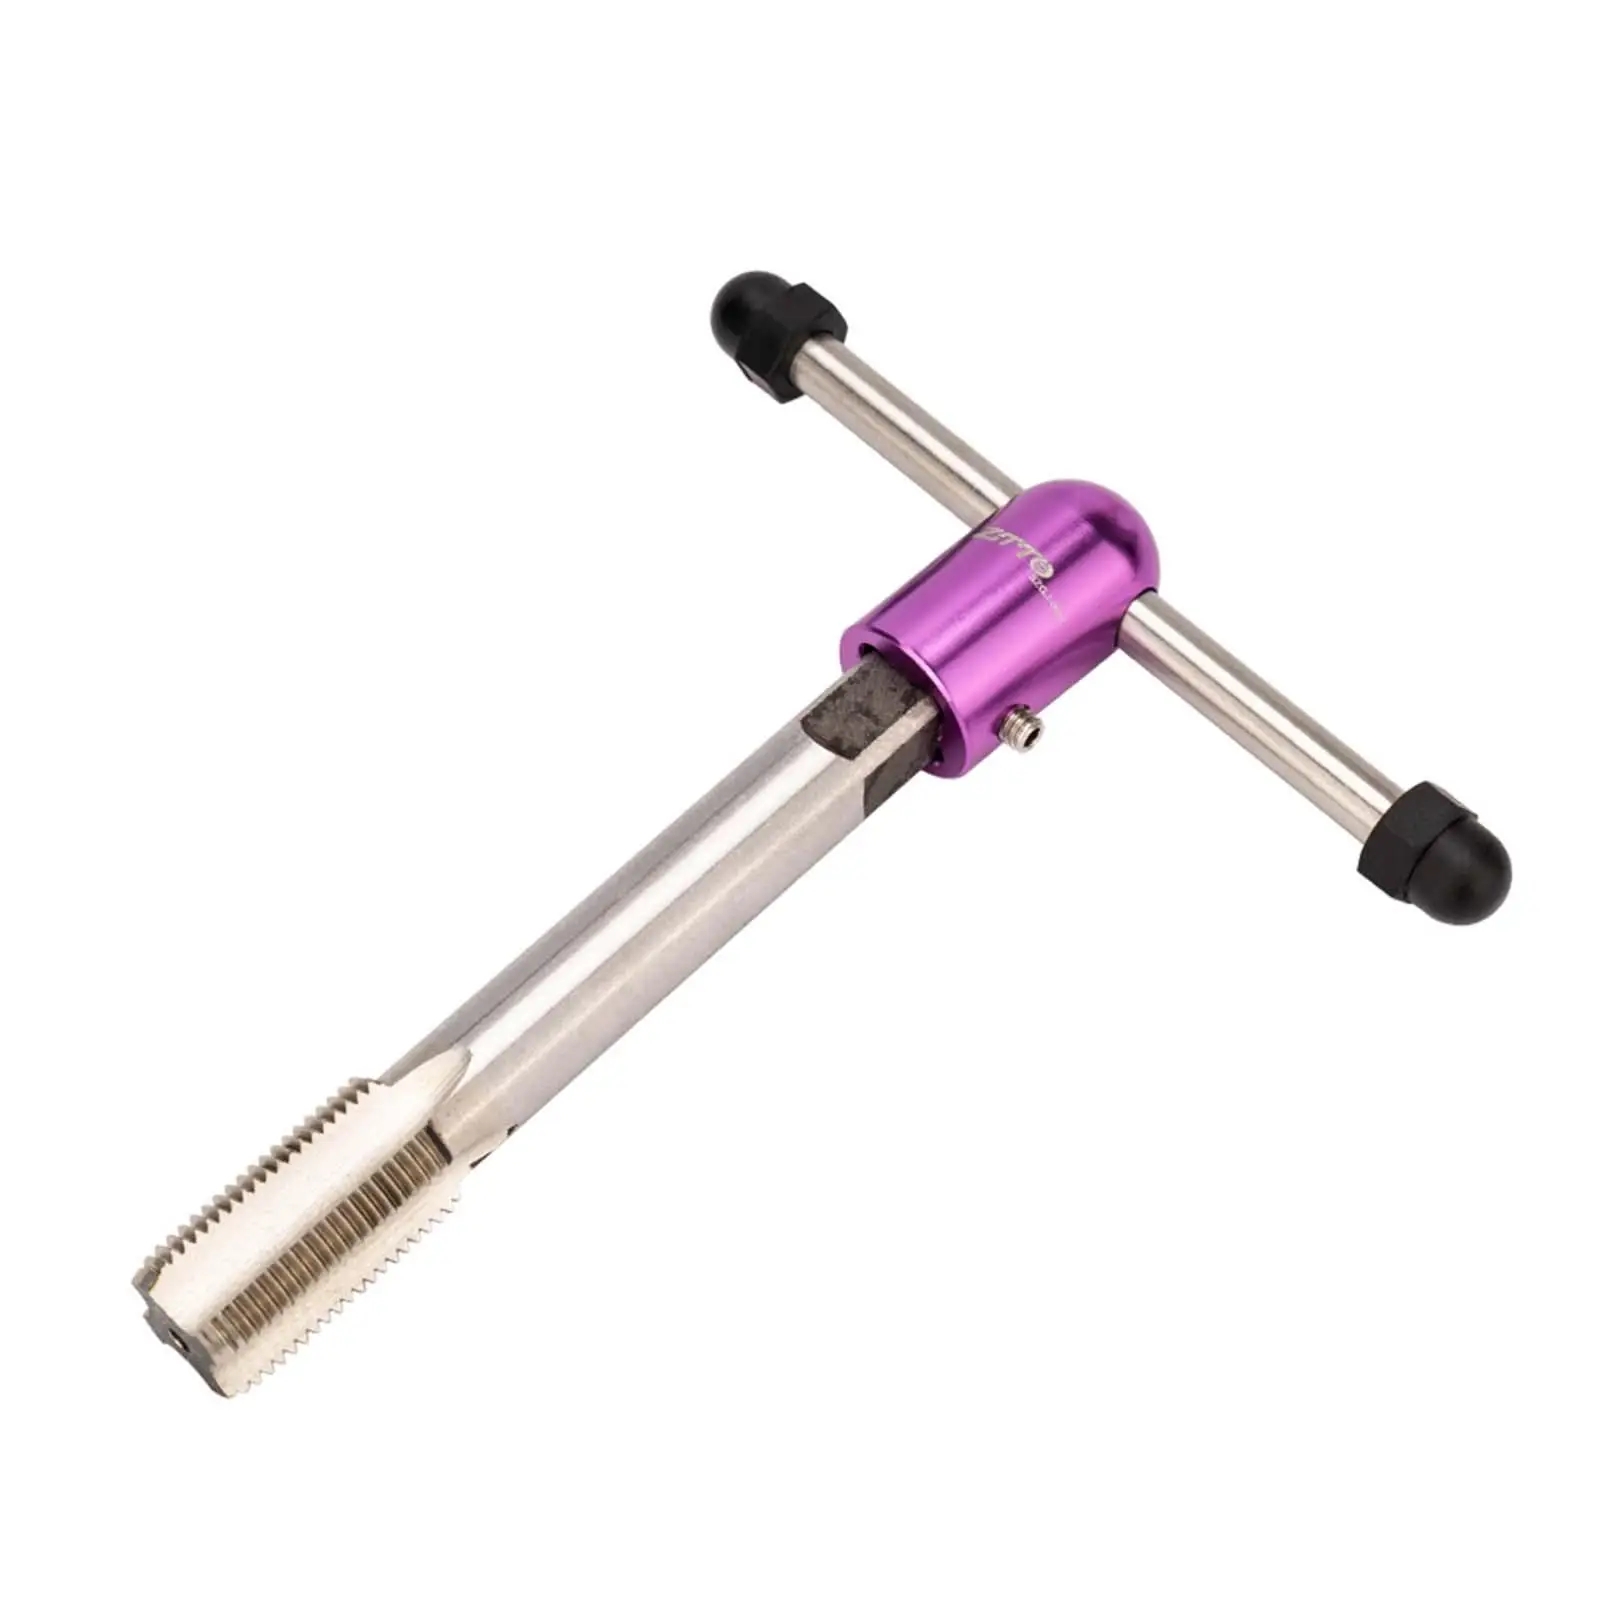 Aluminum Alloy Bike Crank Tapping Threading Tool T Handle Reversible Wrench Repair Tool Pedal Screwdriver for Accessories